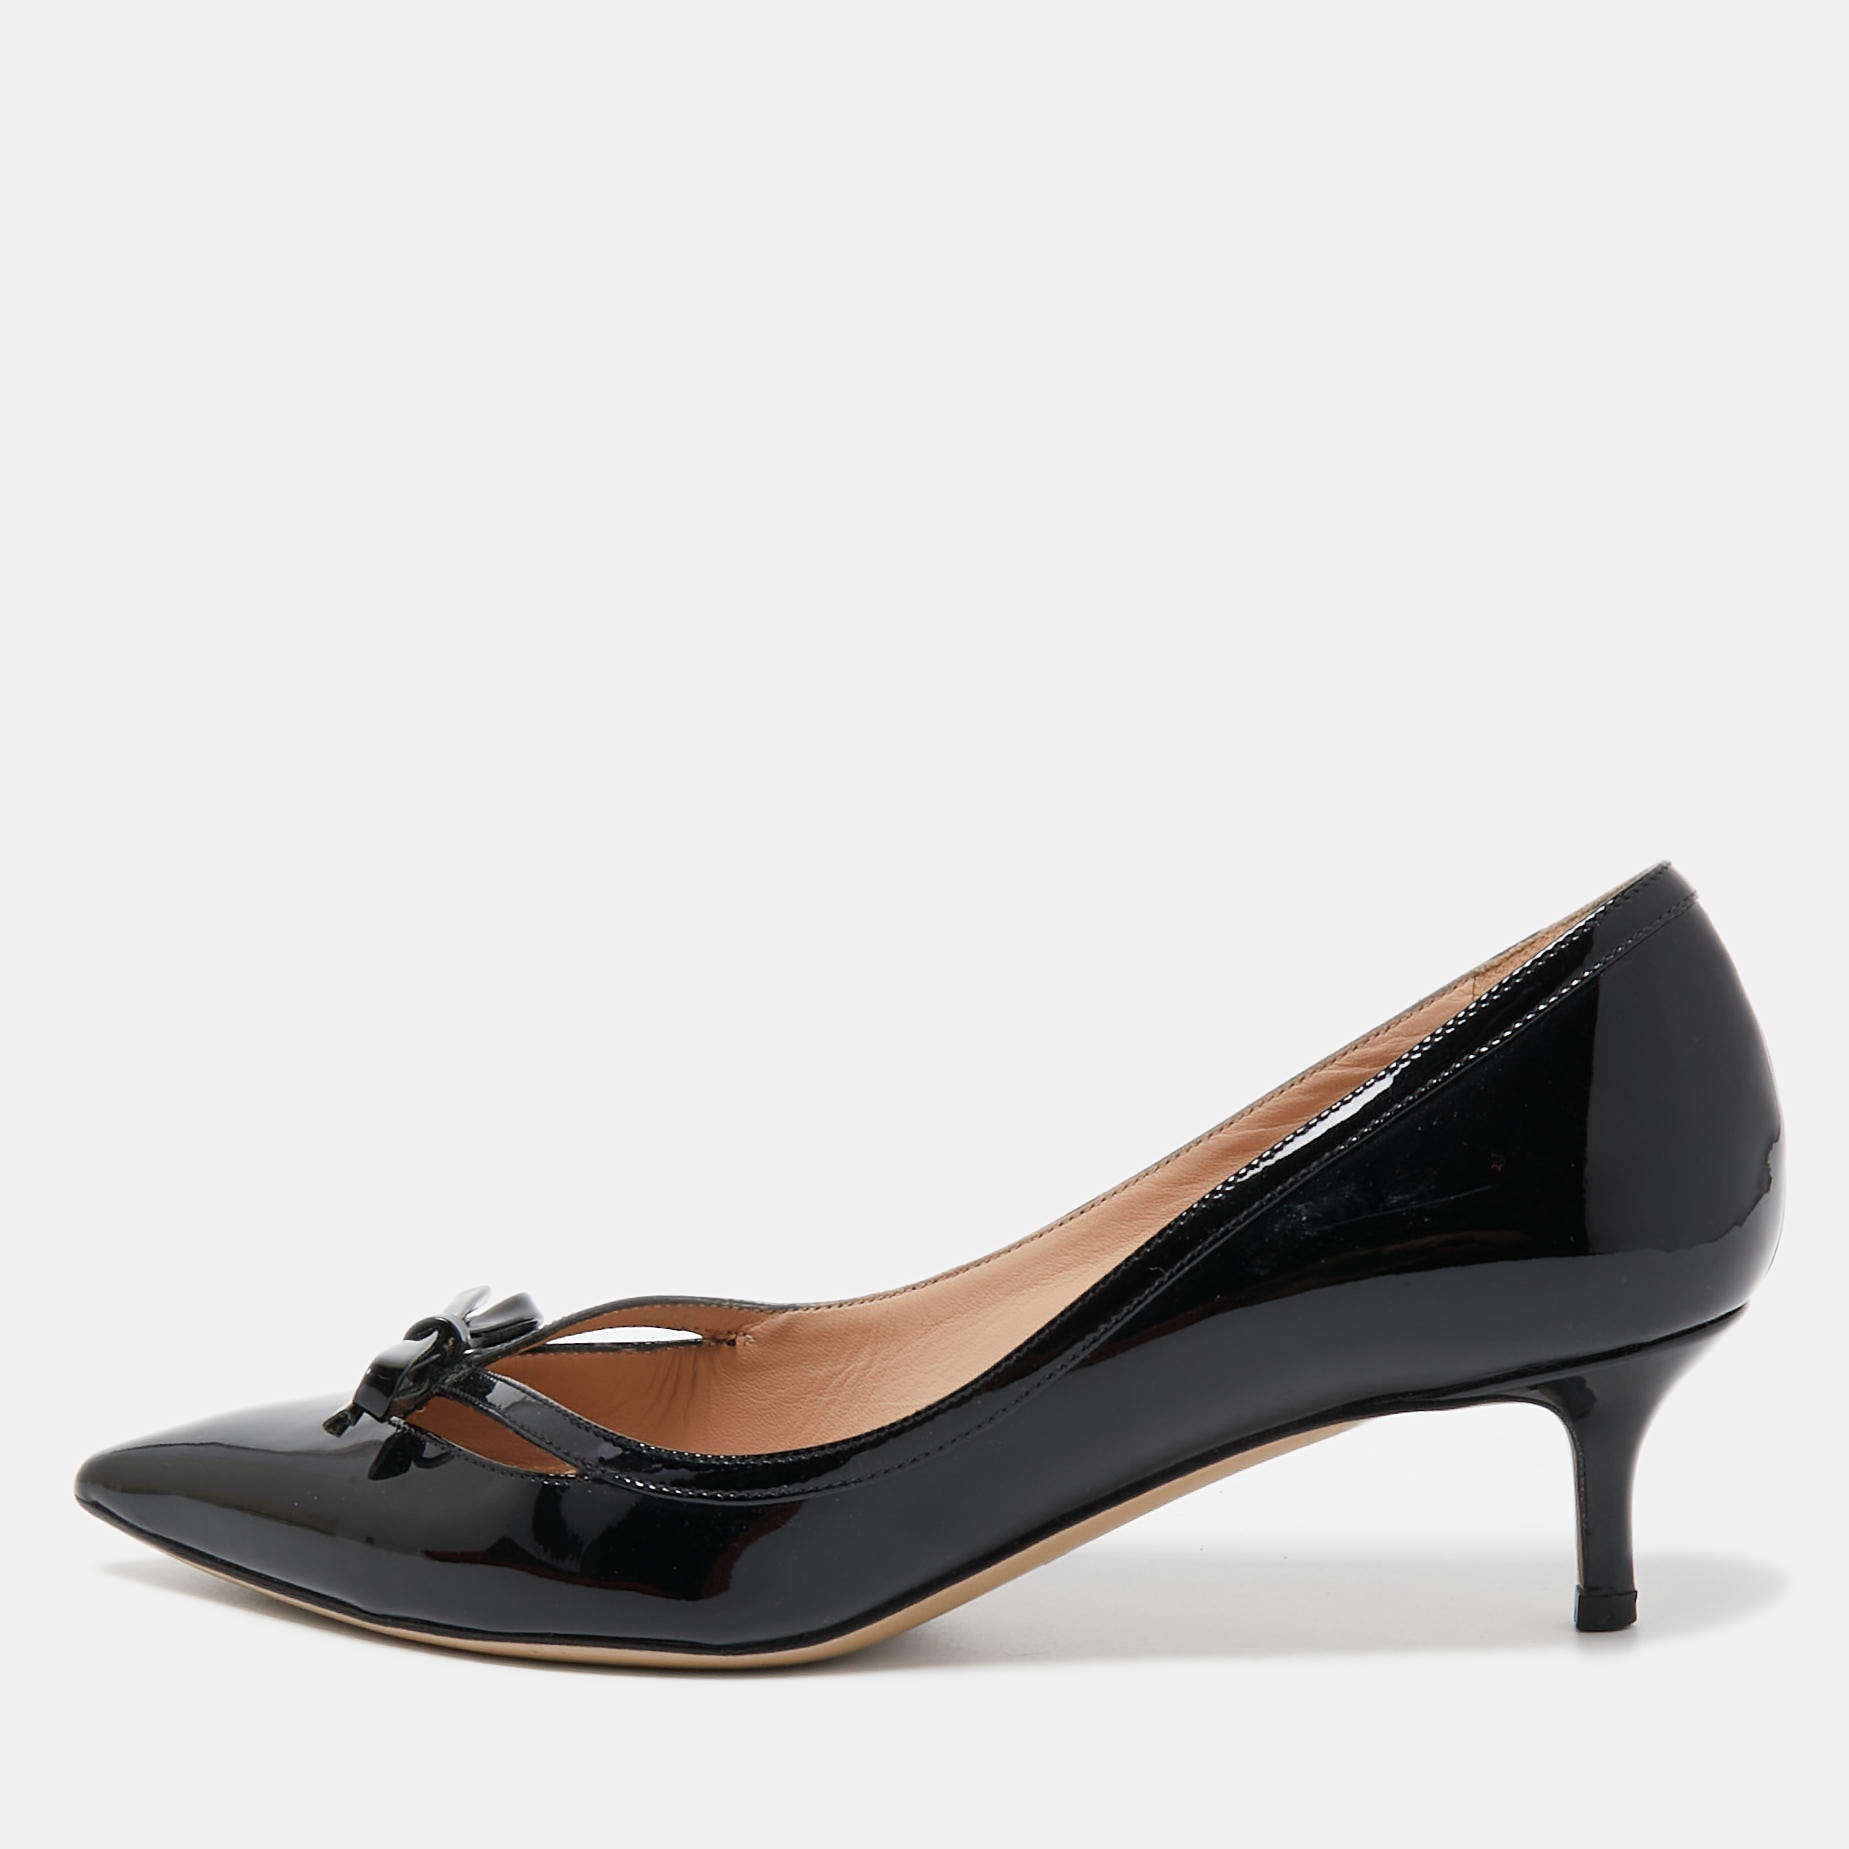 Valentino Black Patent Leather Bow Pumps Size 36.5